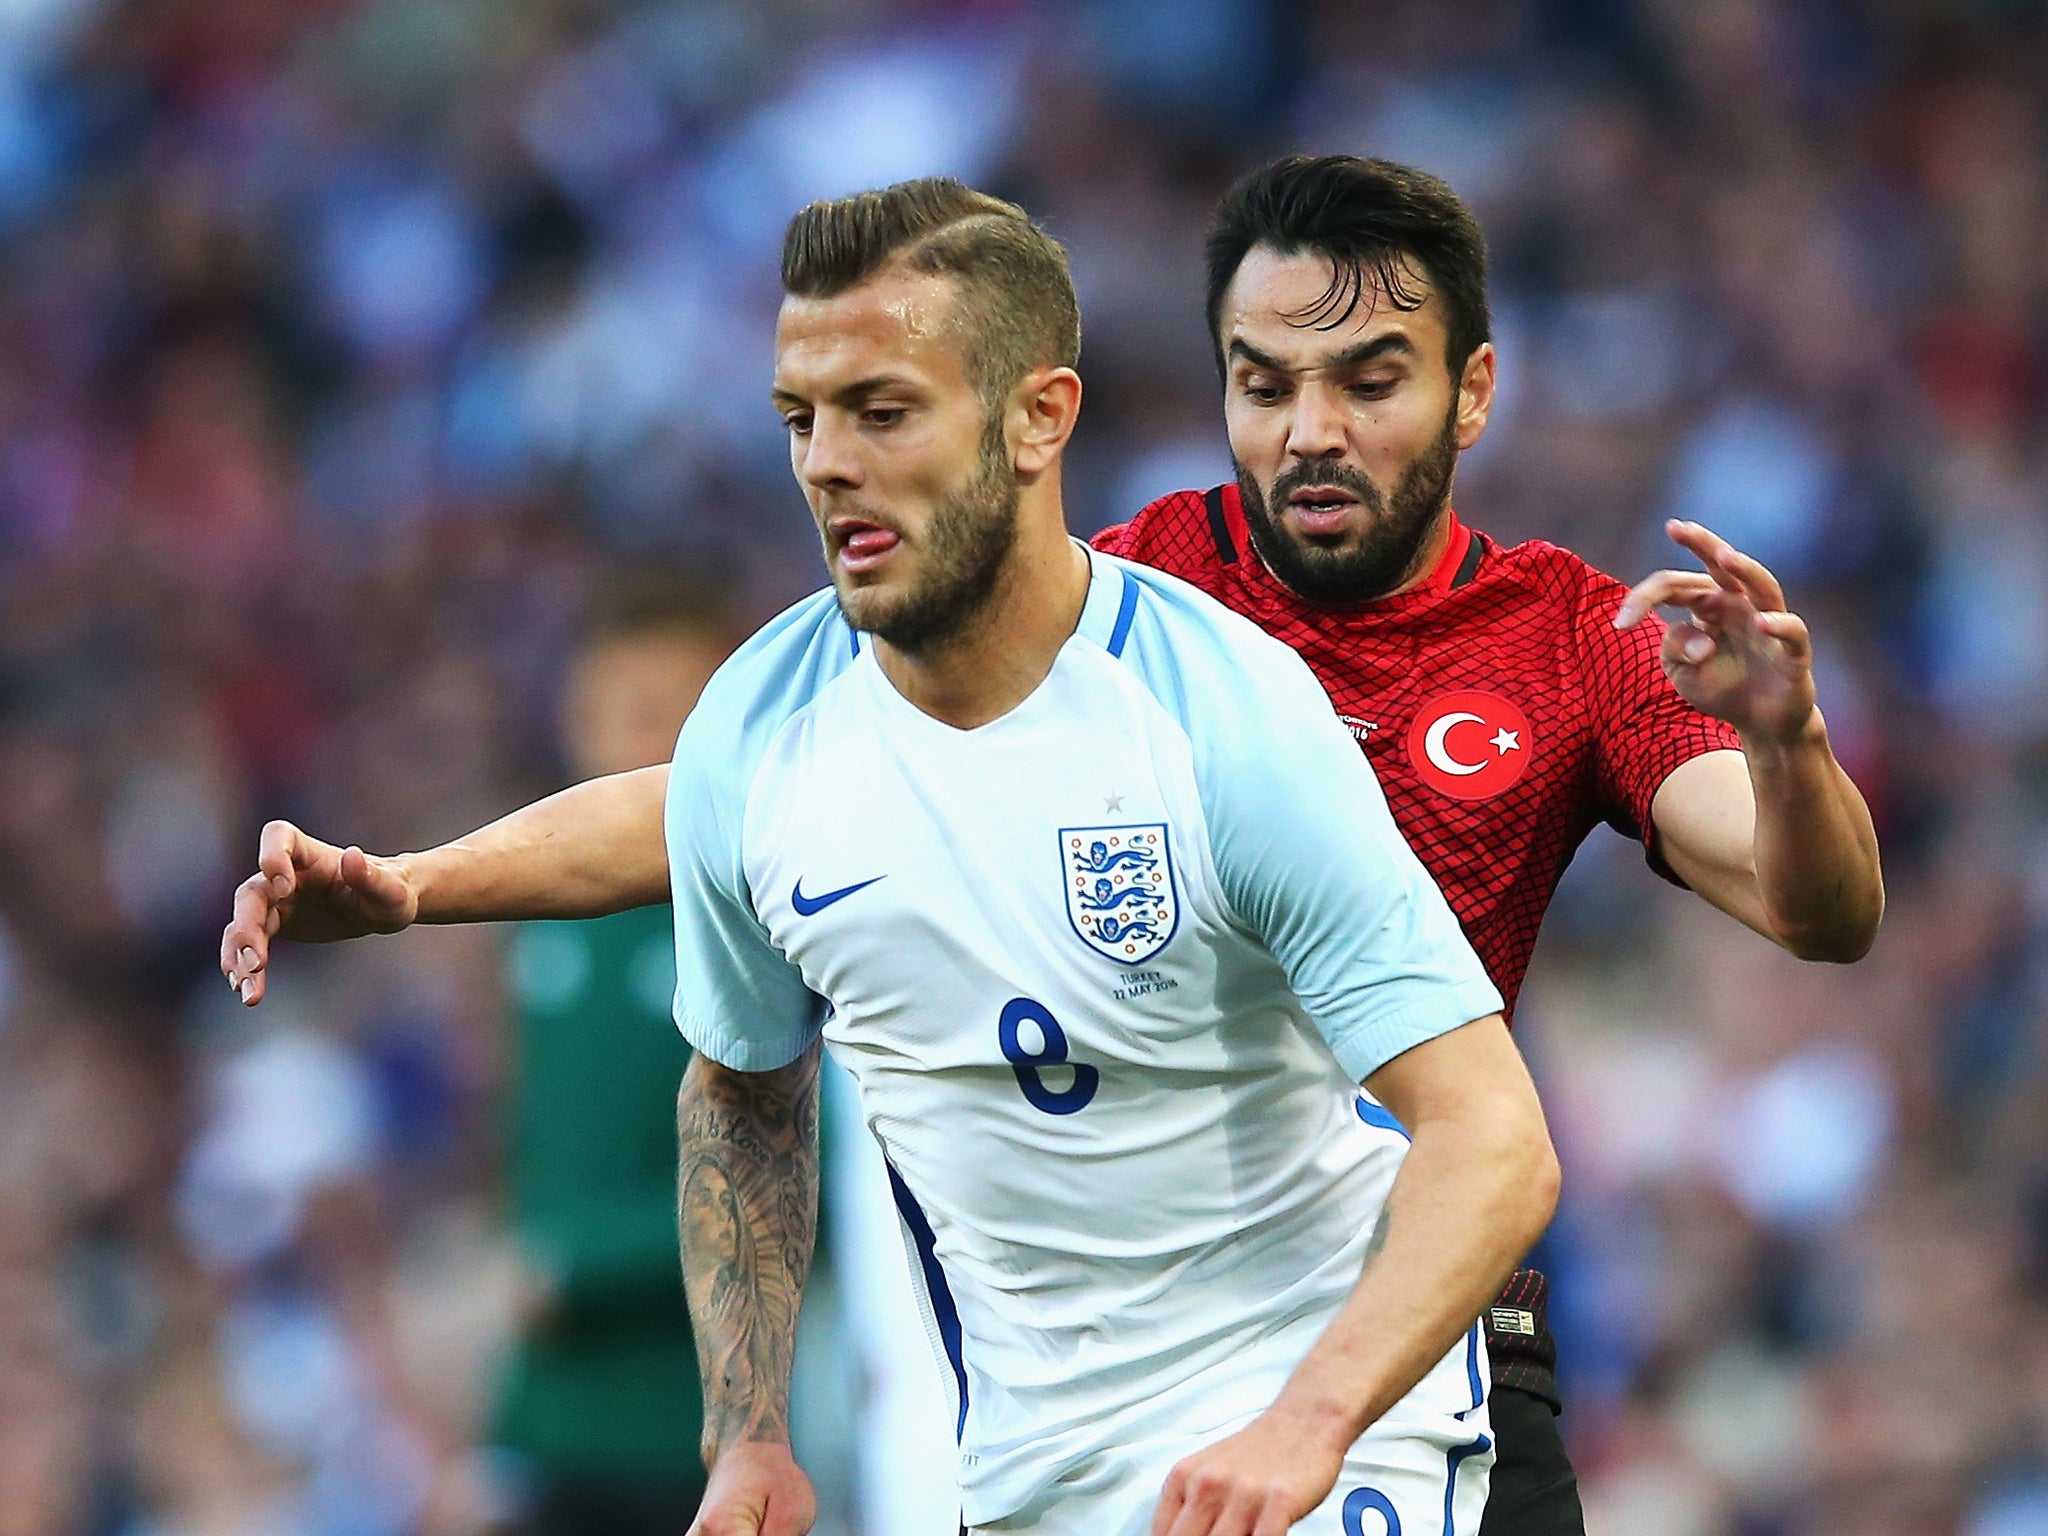 Wilshere's appearance against Turkey was his first on the international stage for almost a year